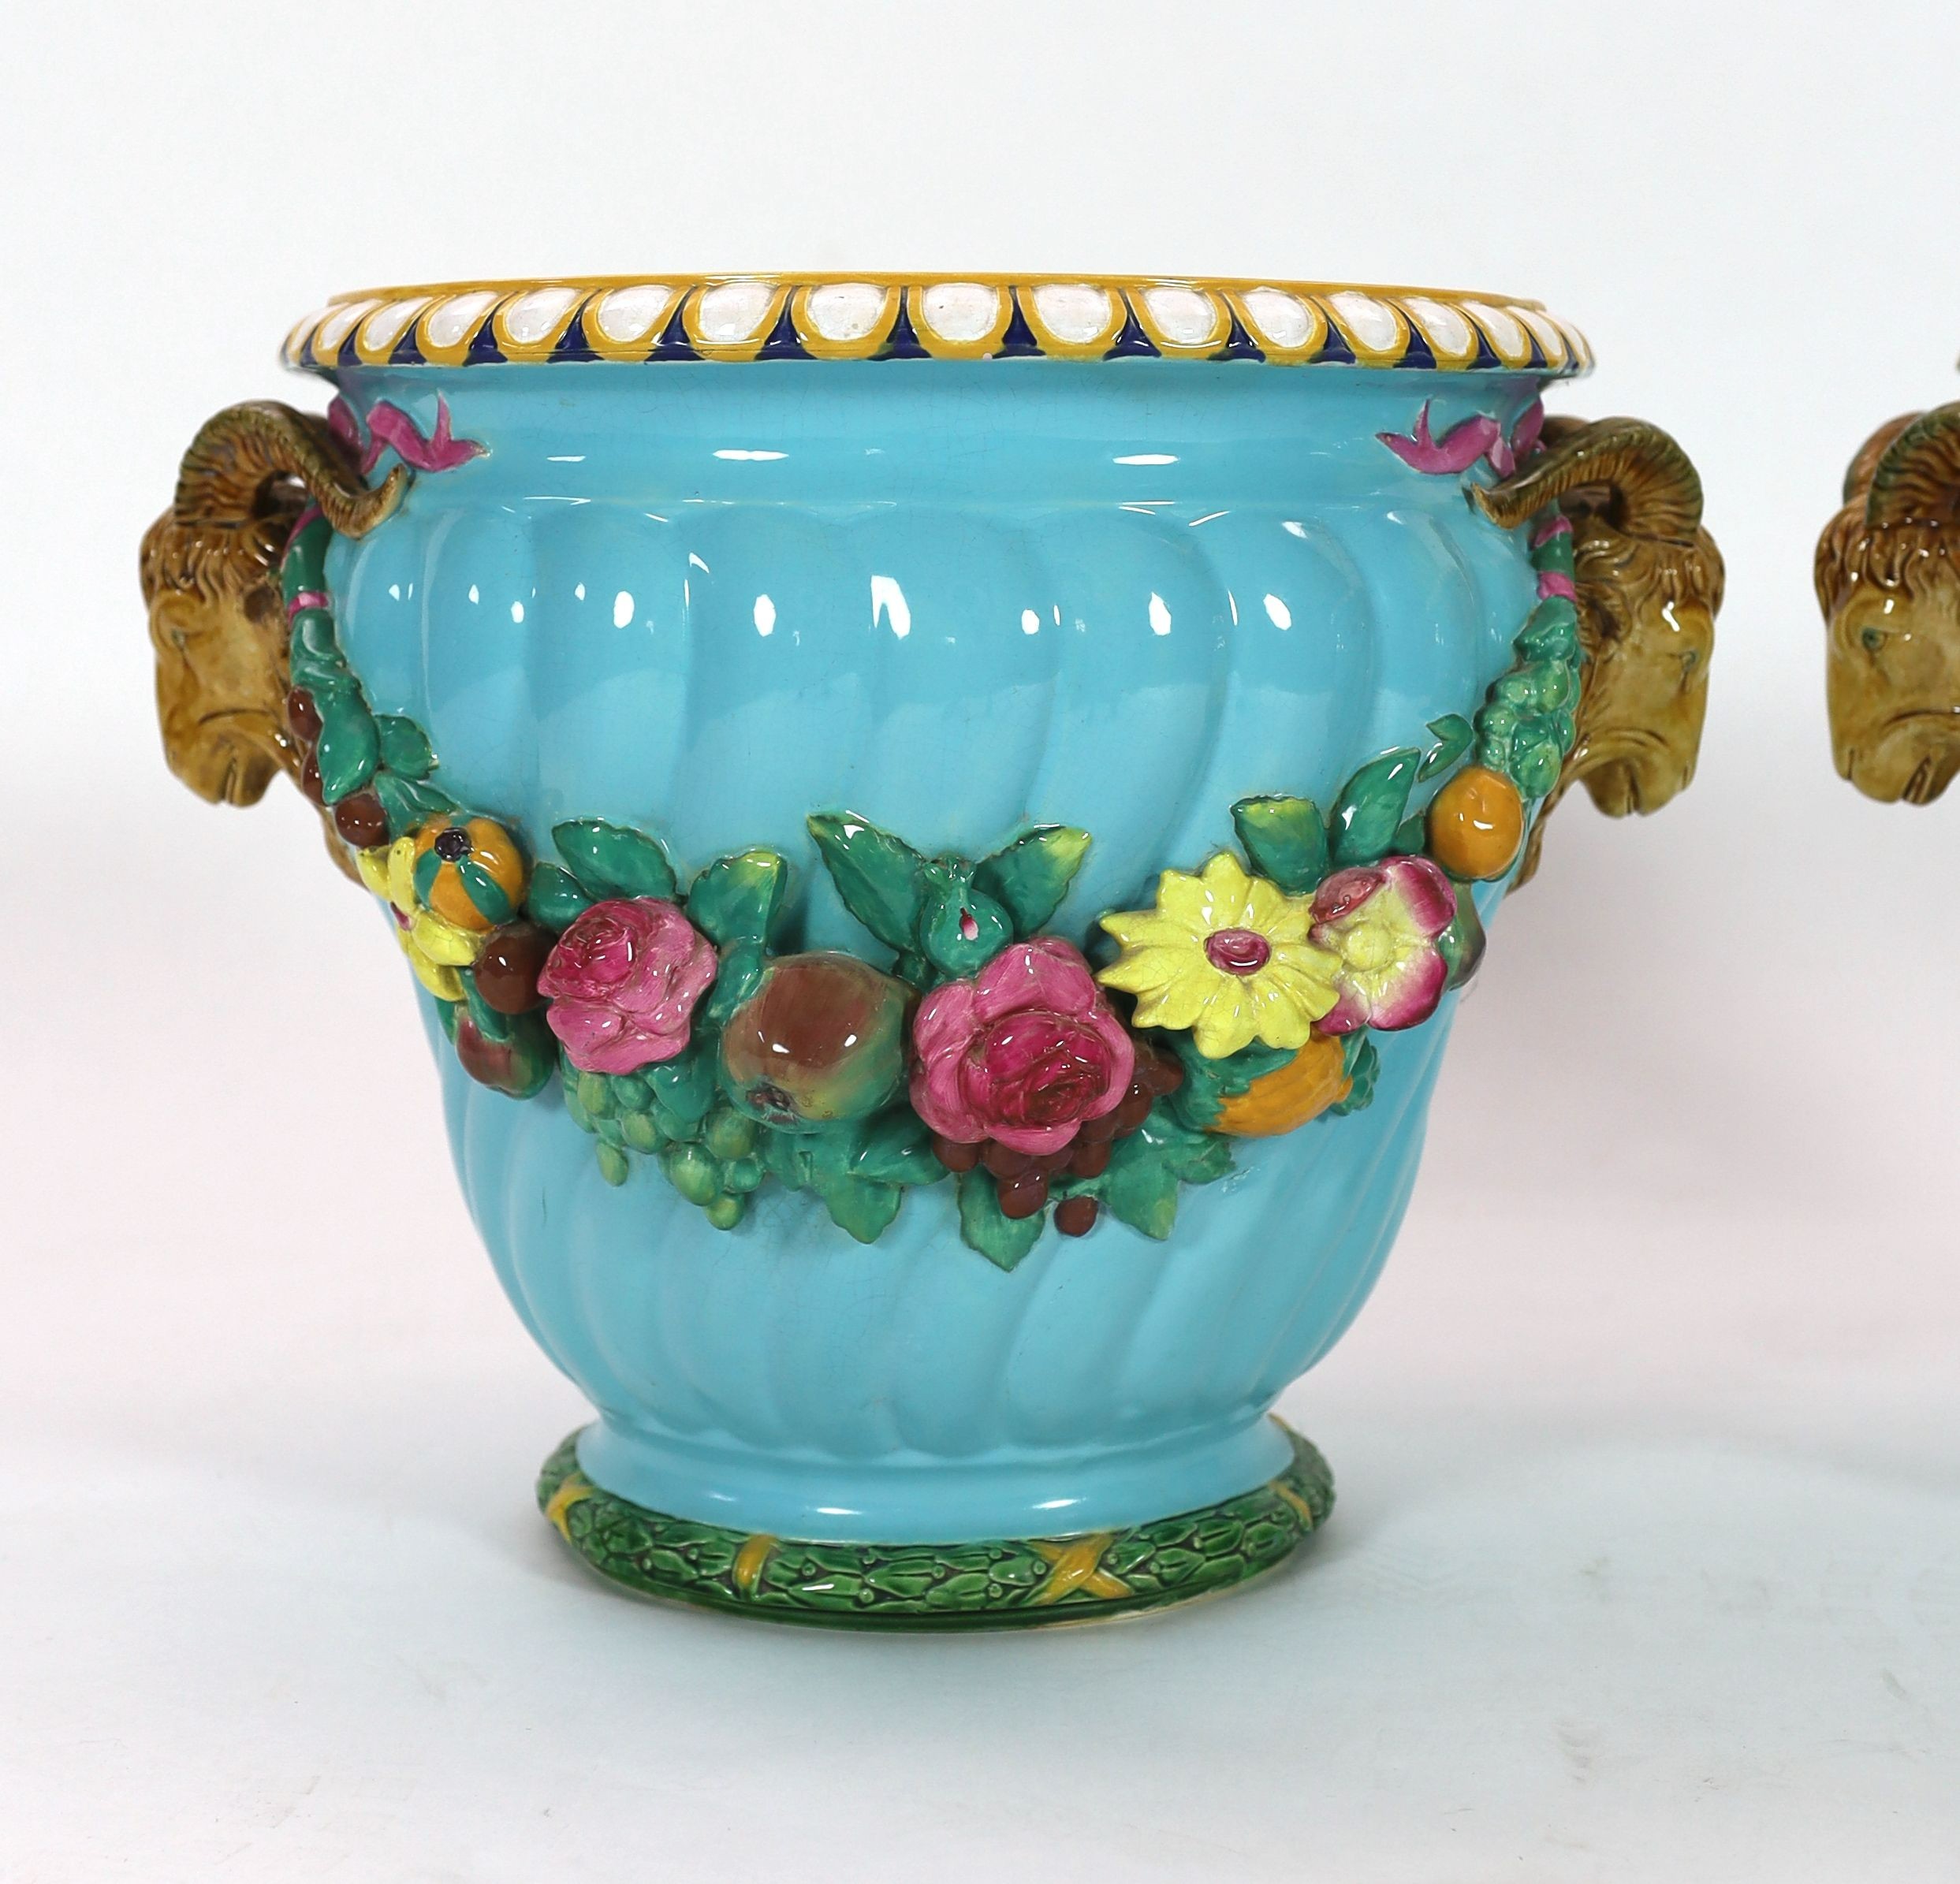 A pair of Minton classical revival majolica jardinieres, late 19th century, 37cm high, restored